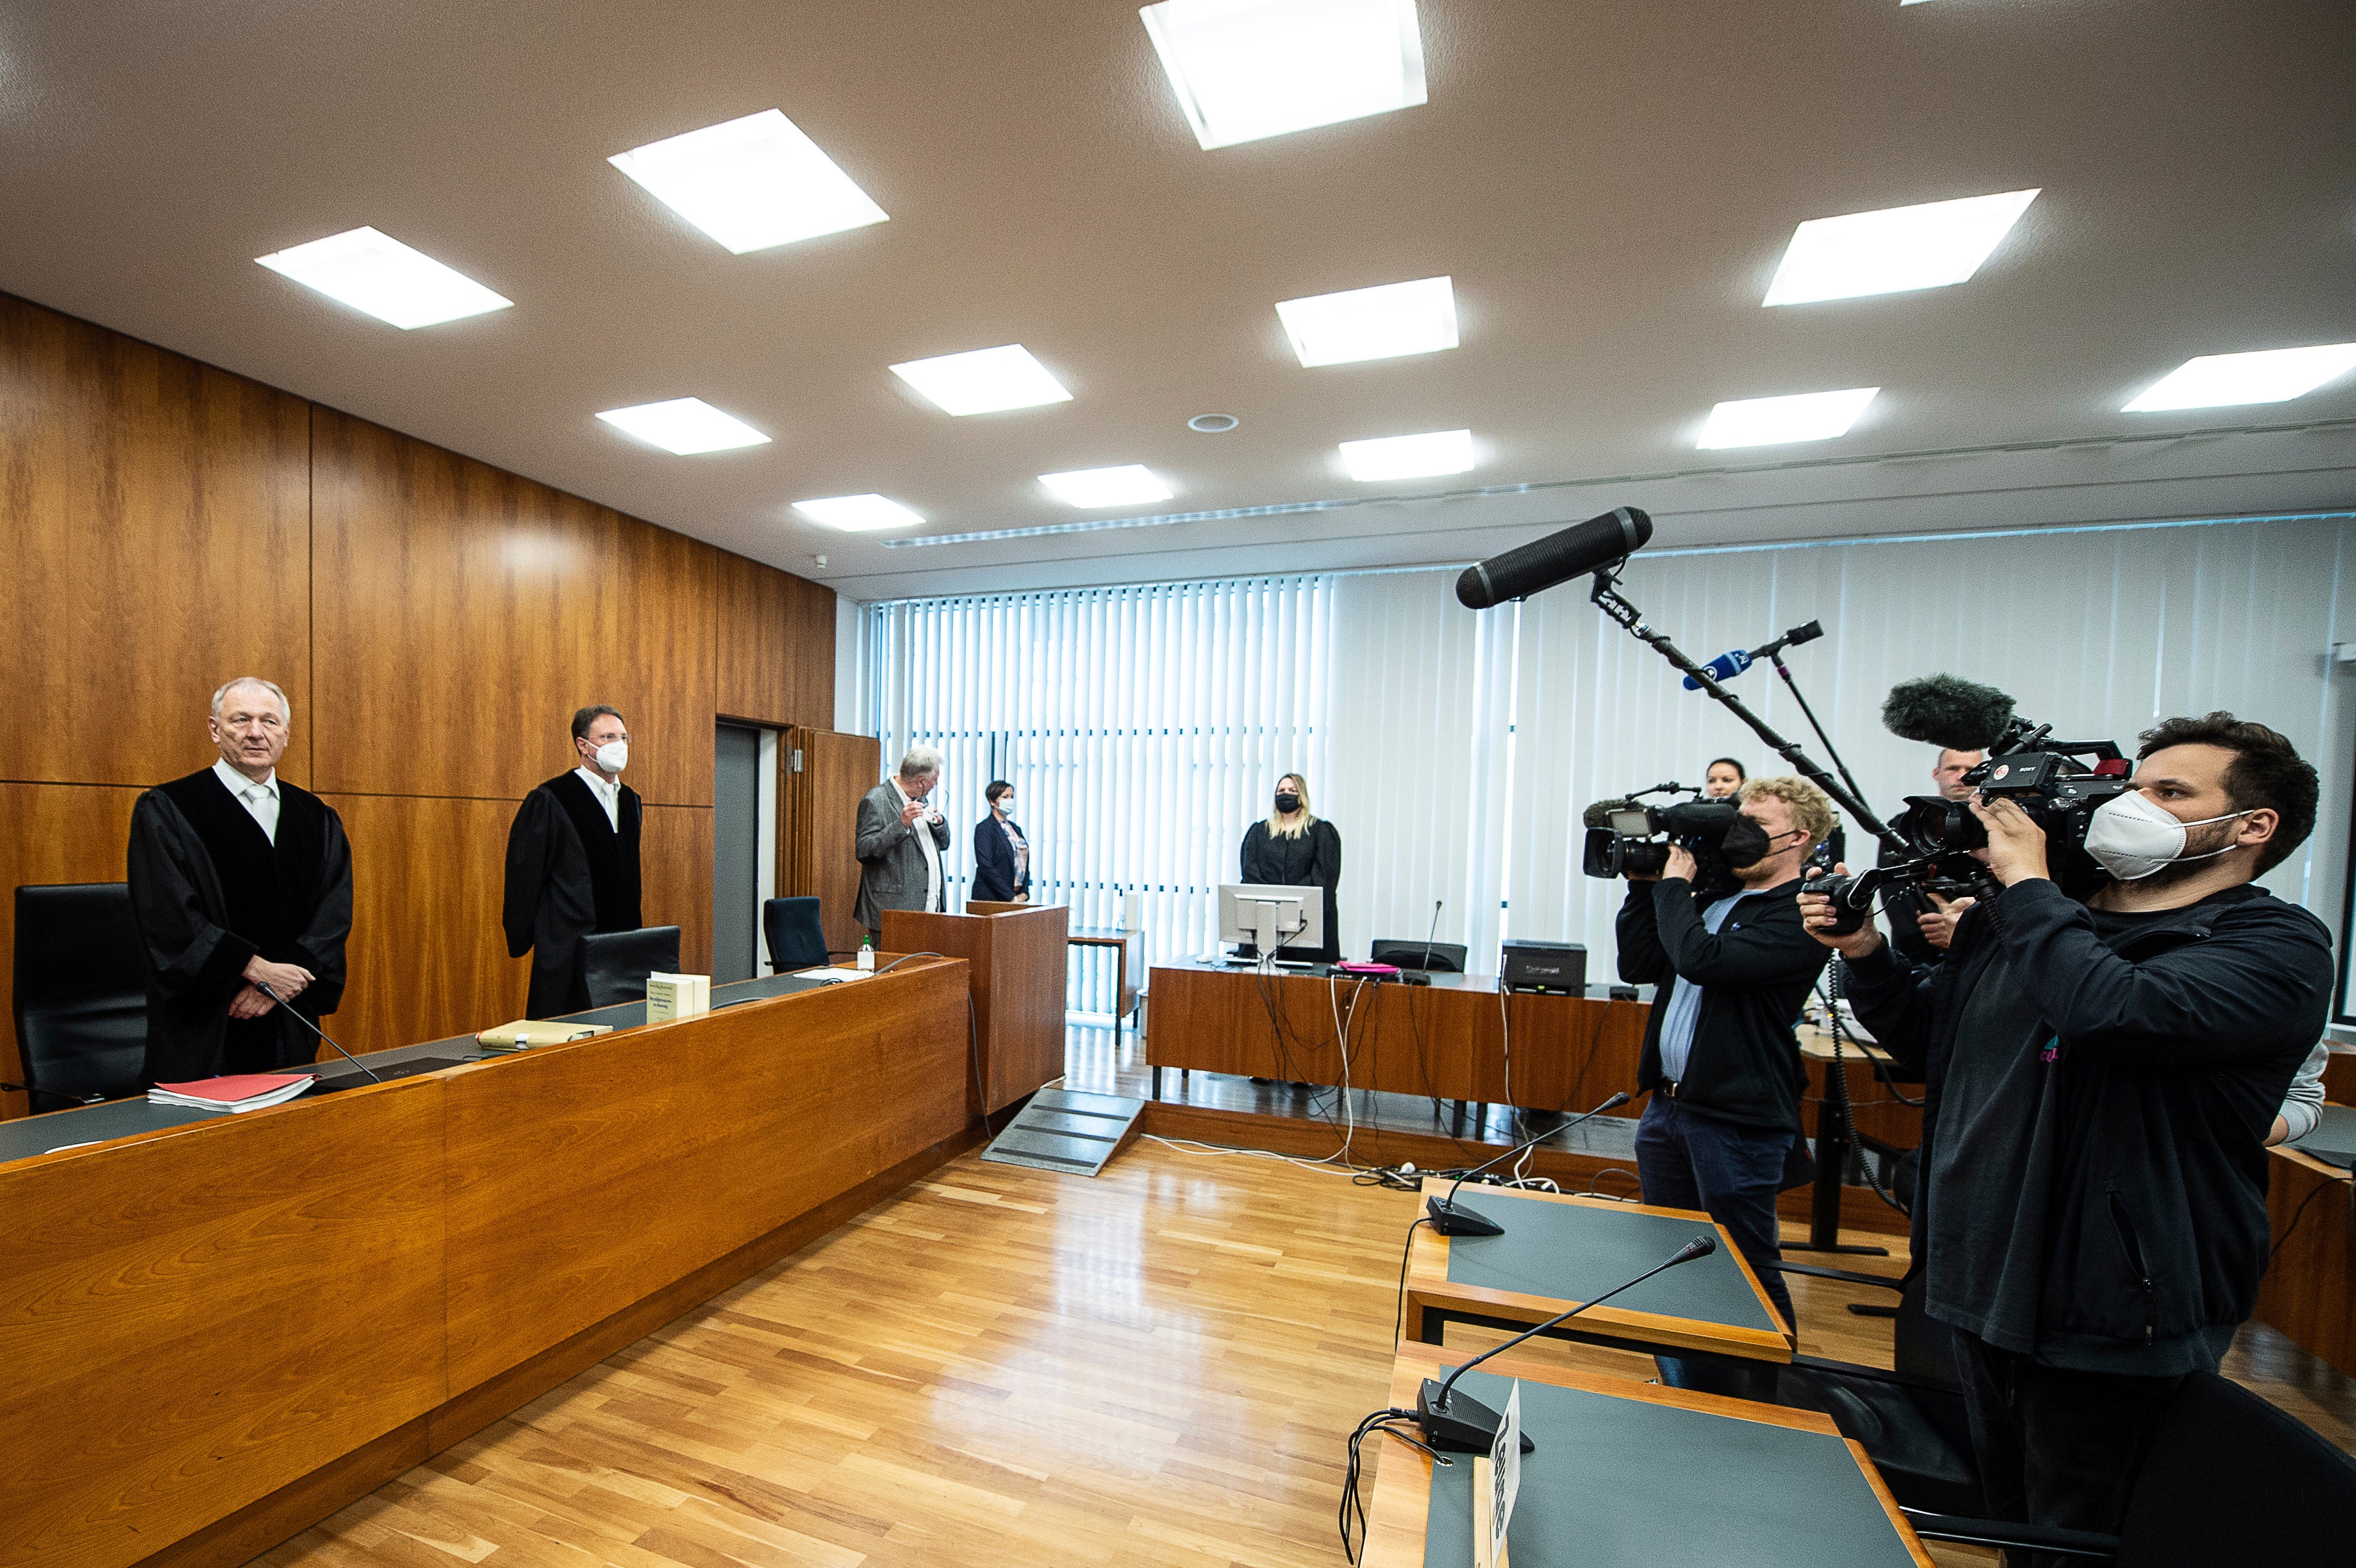 A German court on Wednesday sentenced a woman who posed as a fake doctor and caused the deaths of several of people